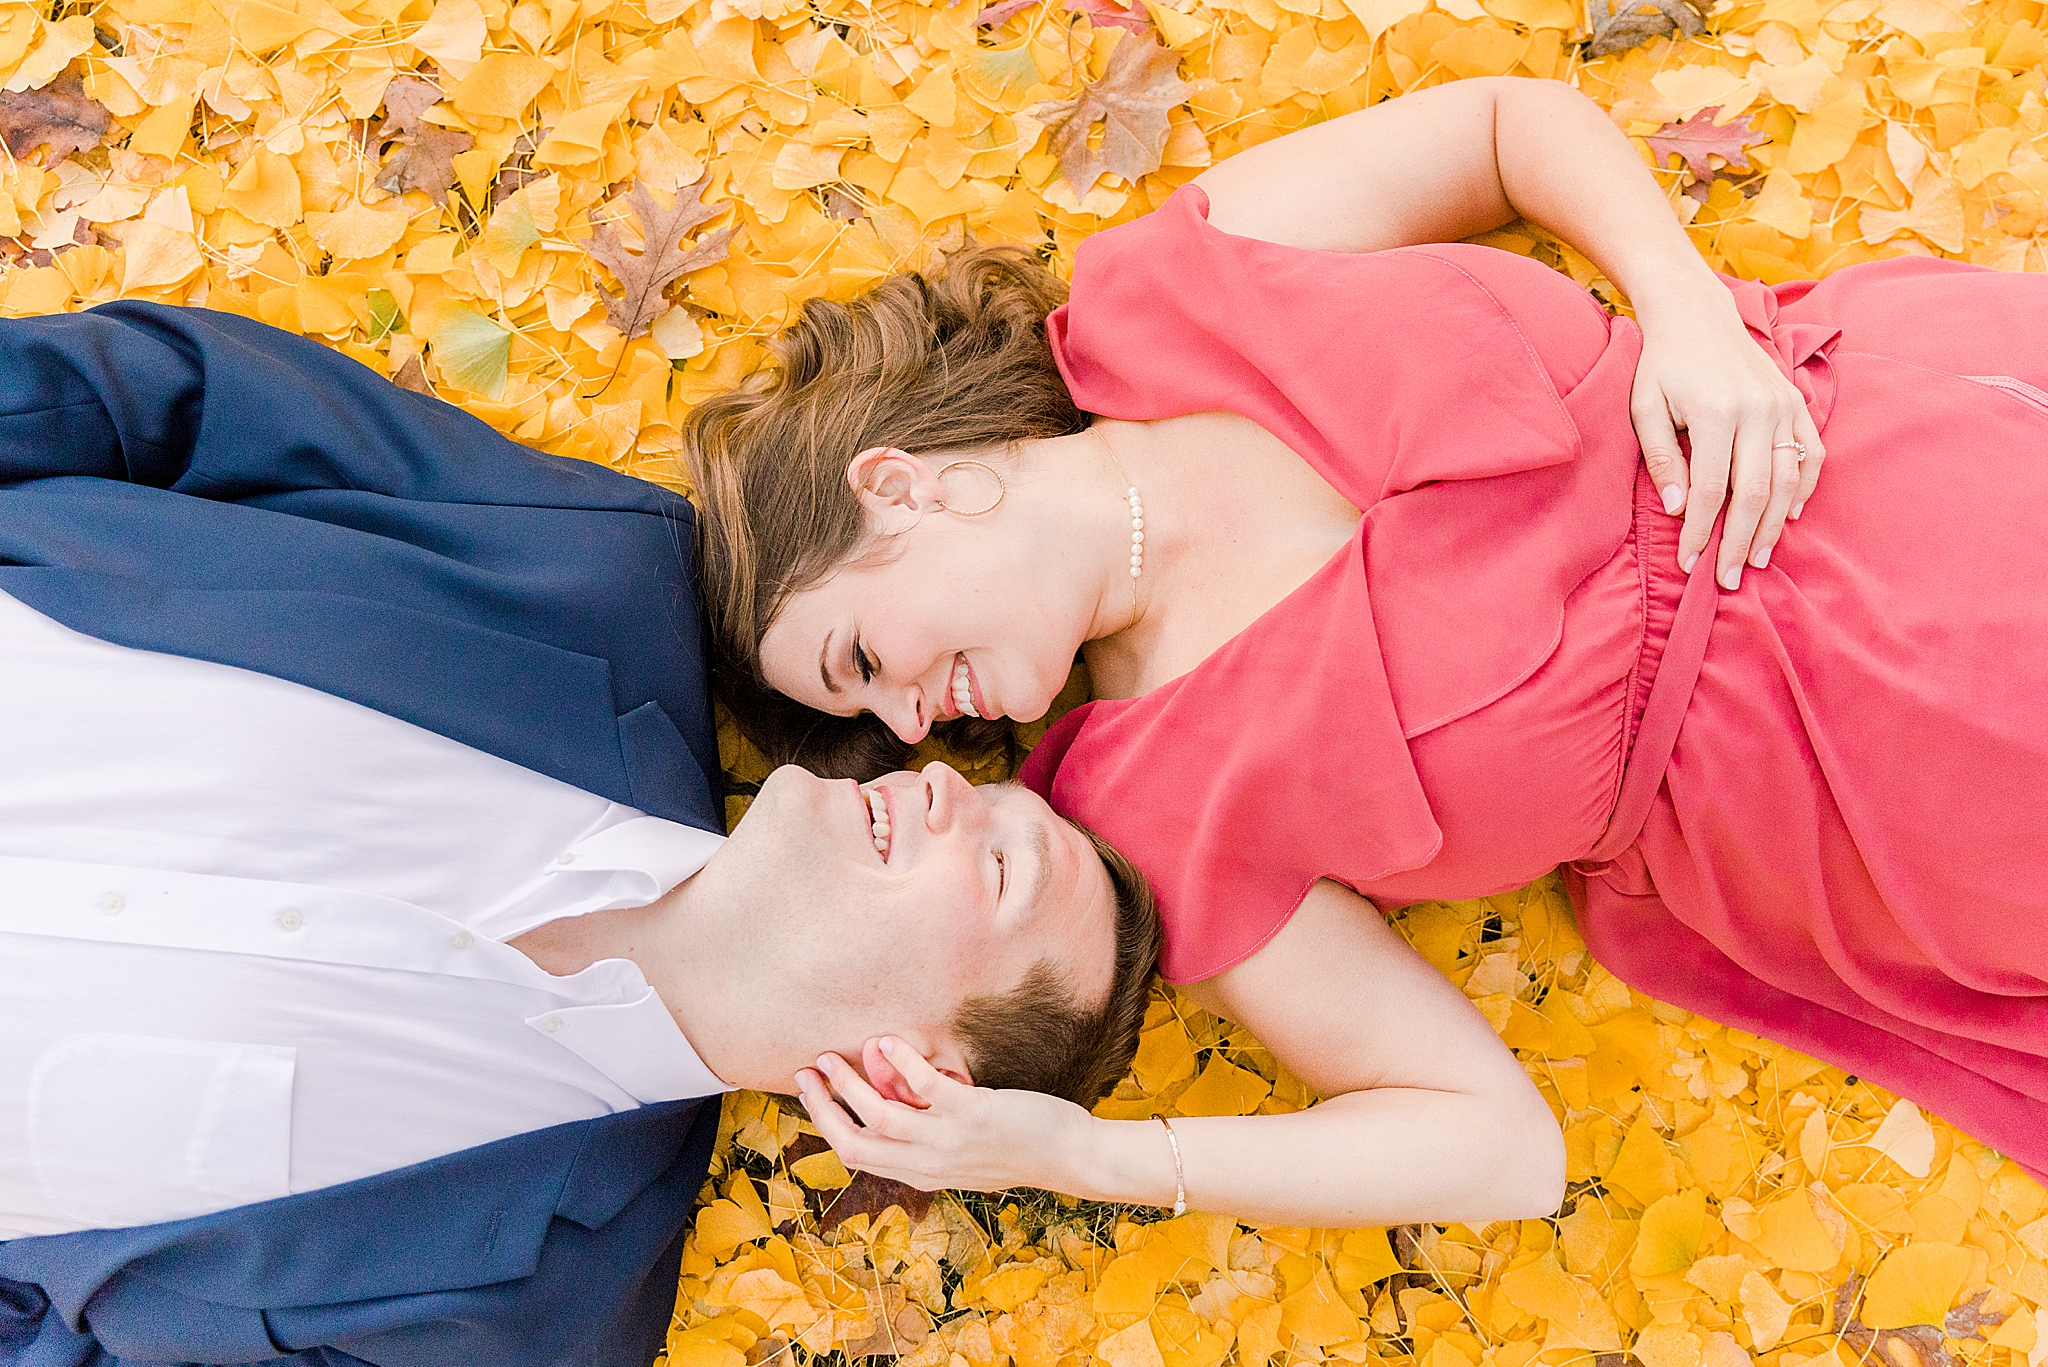 groom in navy jacket lays in yellow leaves with bride in coral dress